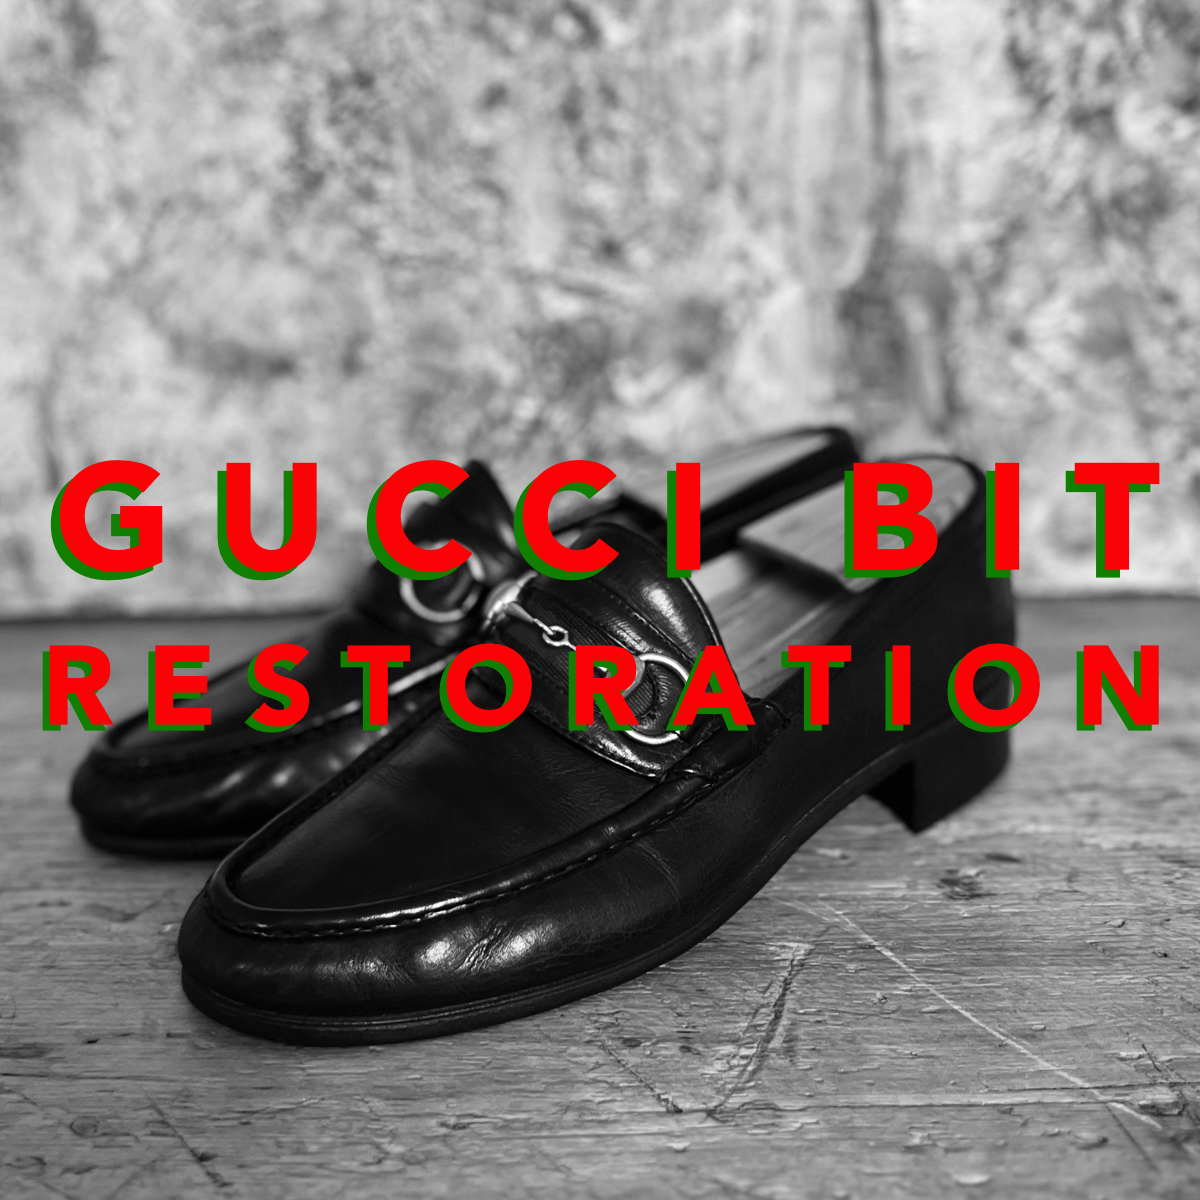 Gucci Bits Restoration (Before & After) by LaRossa Shoe Red Soul